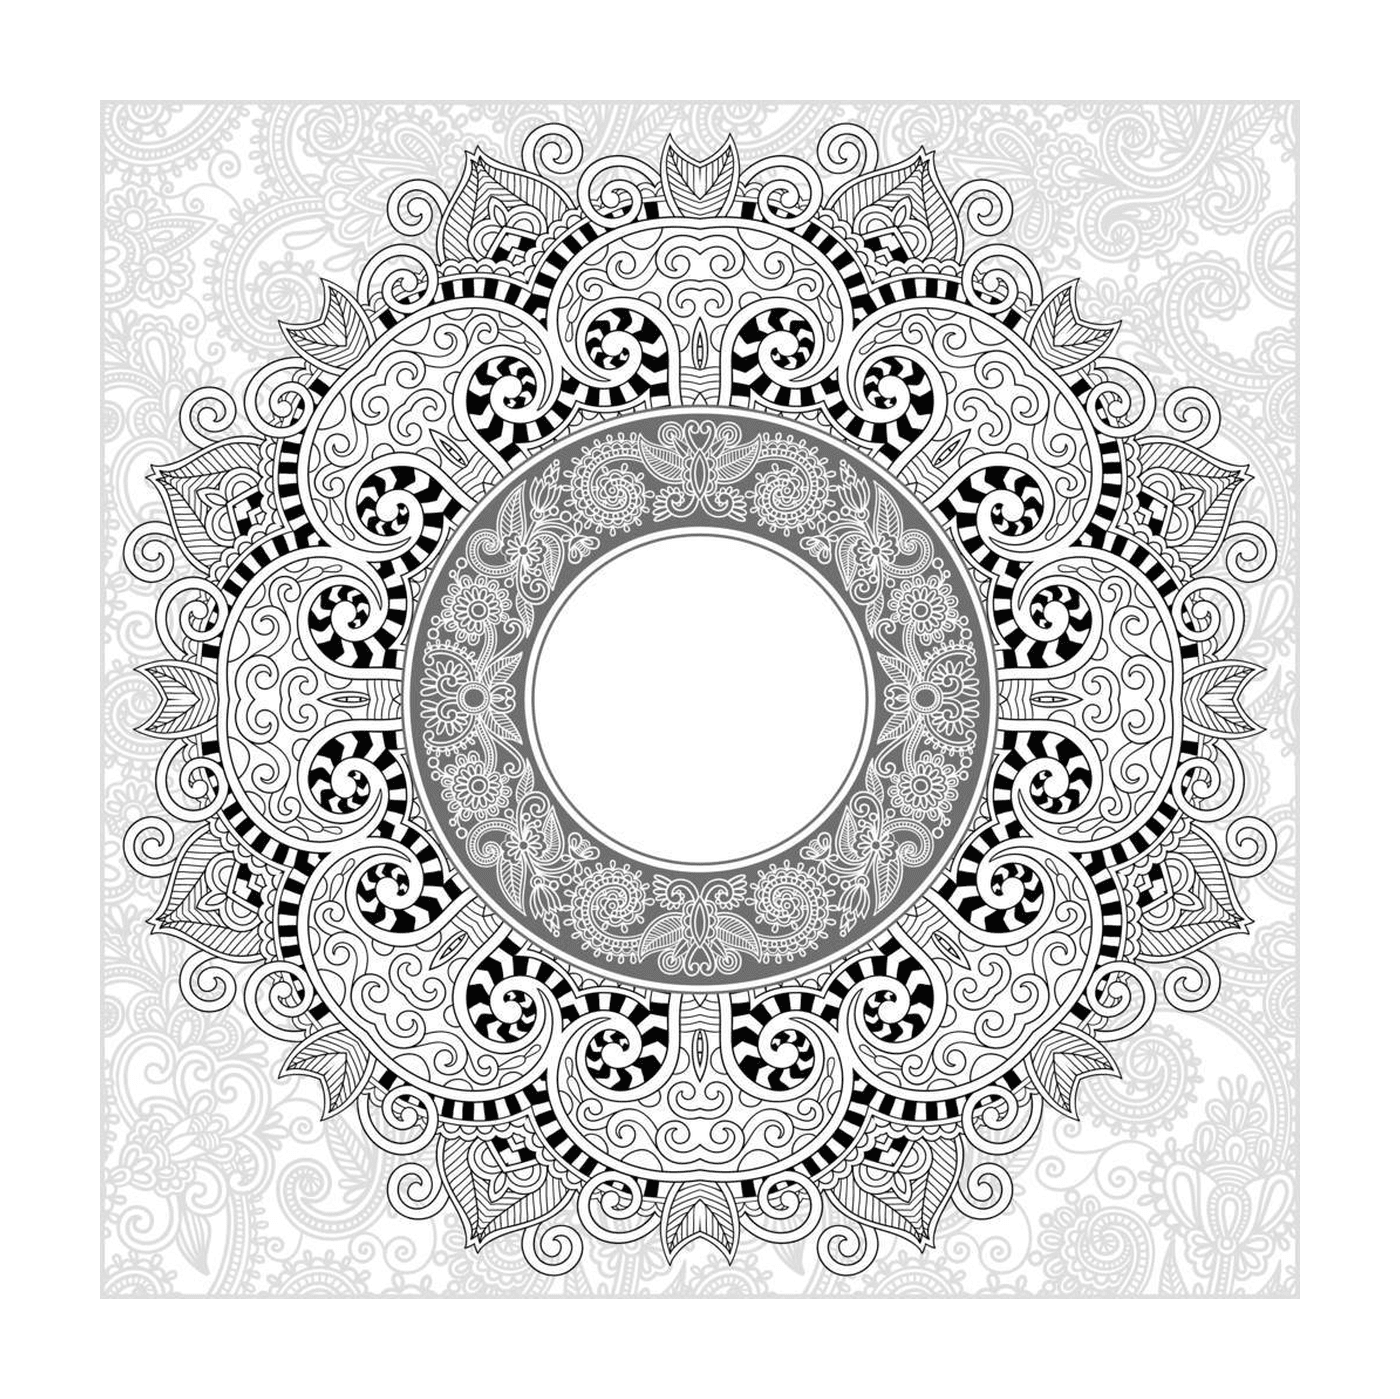  Mandala with flowers in the center 